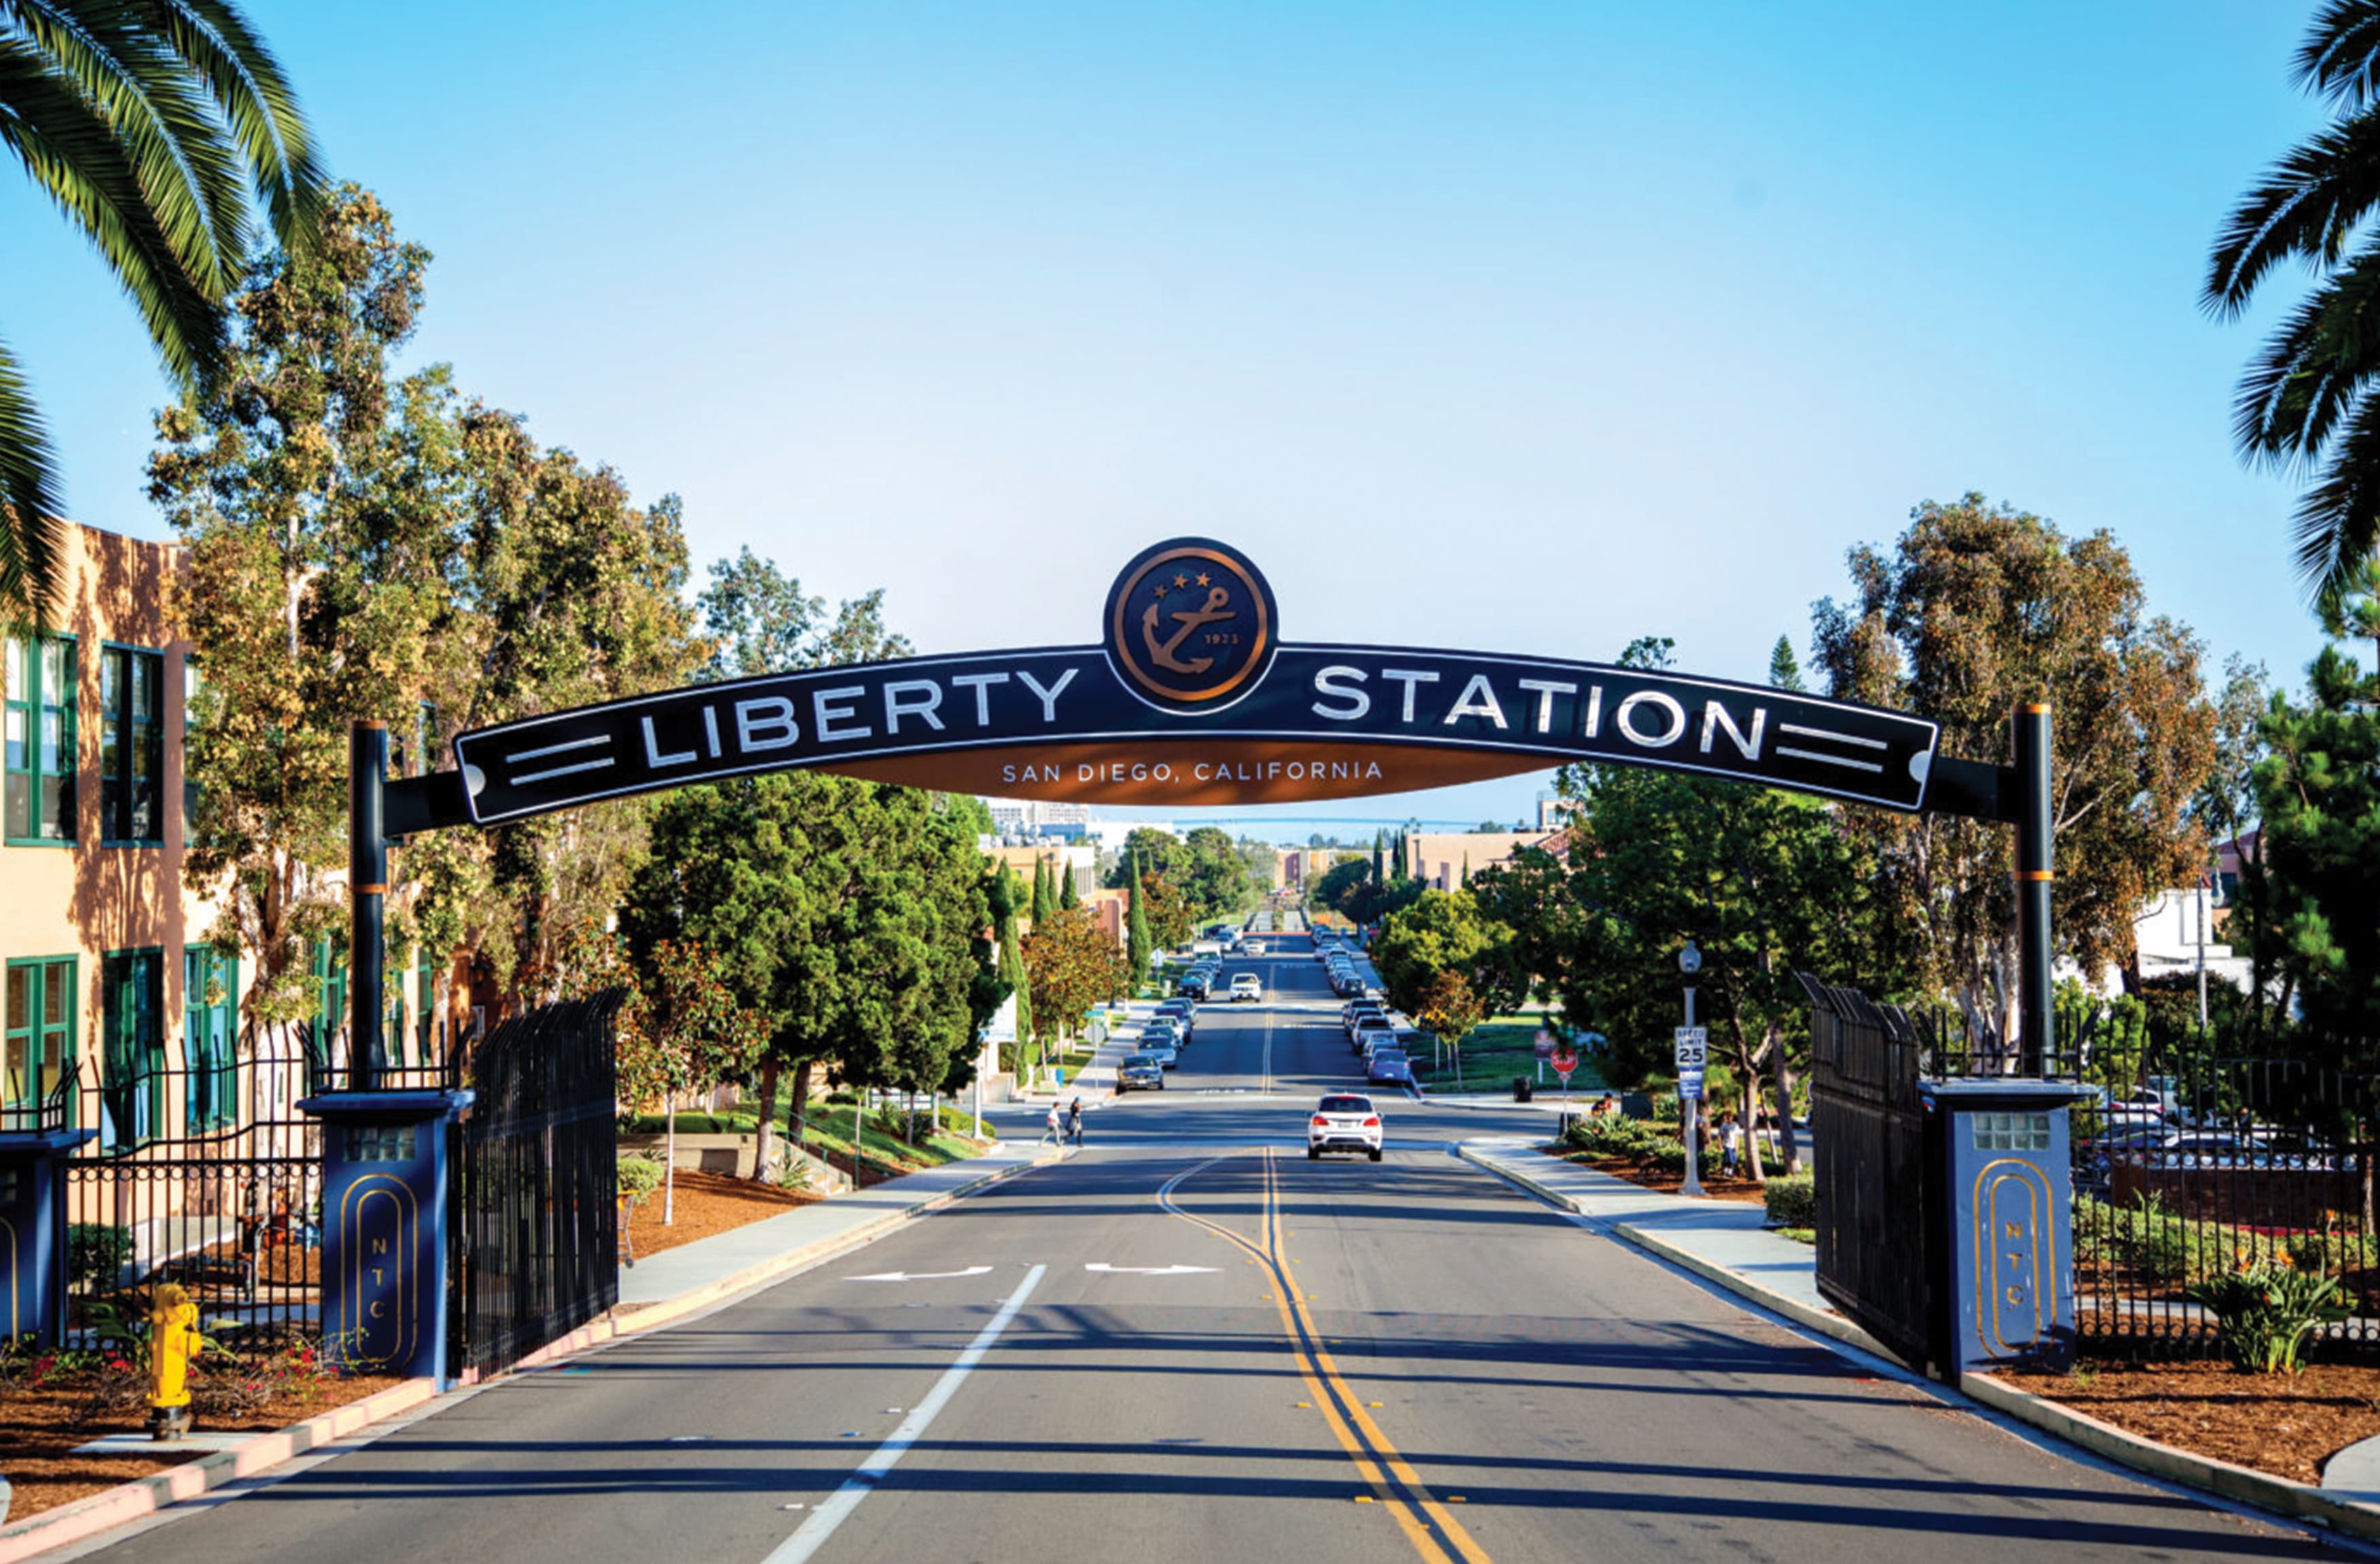 A gateway sign at Liberty Station in San Diego, California.